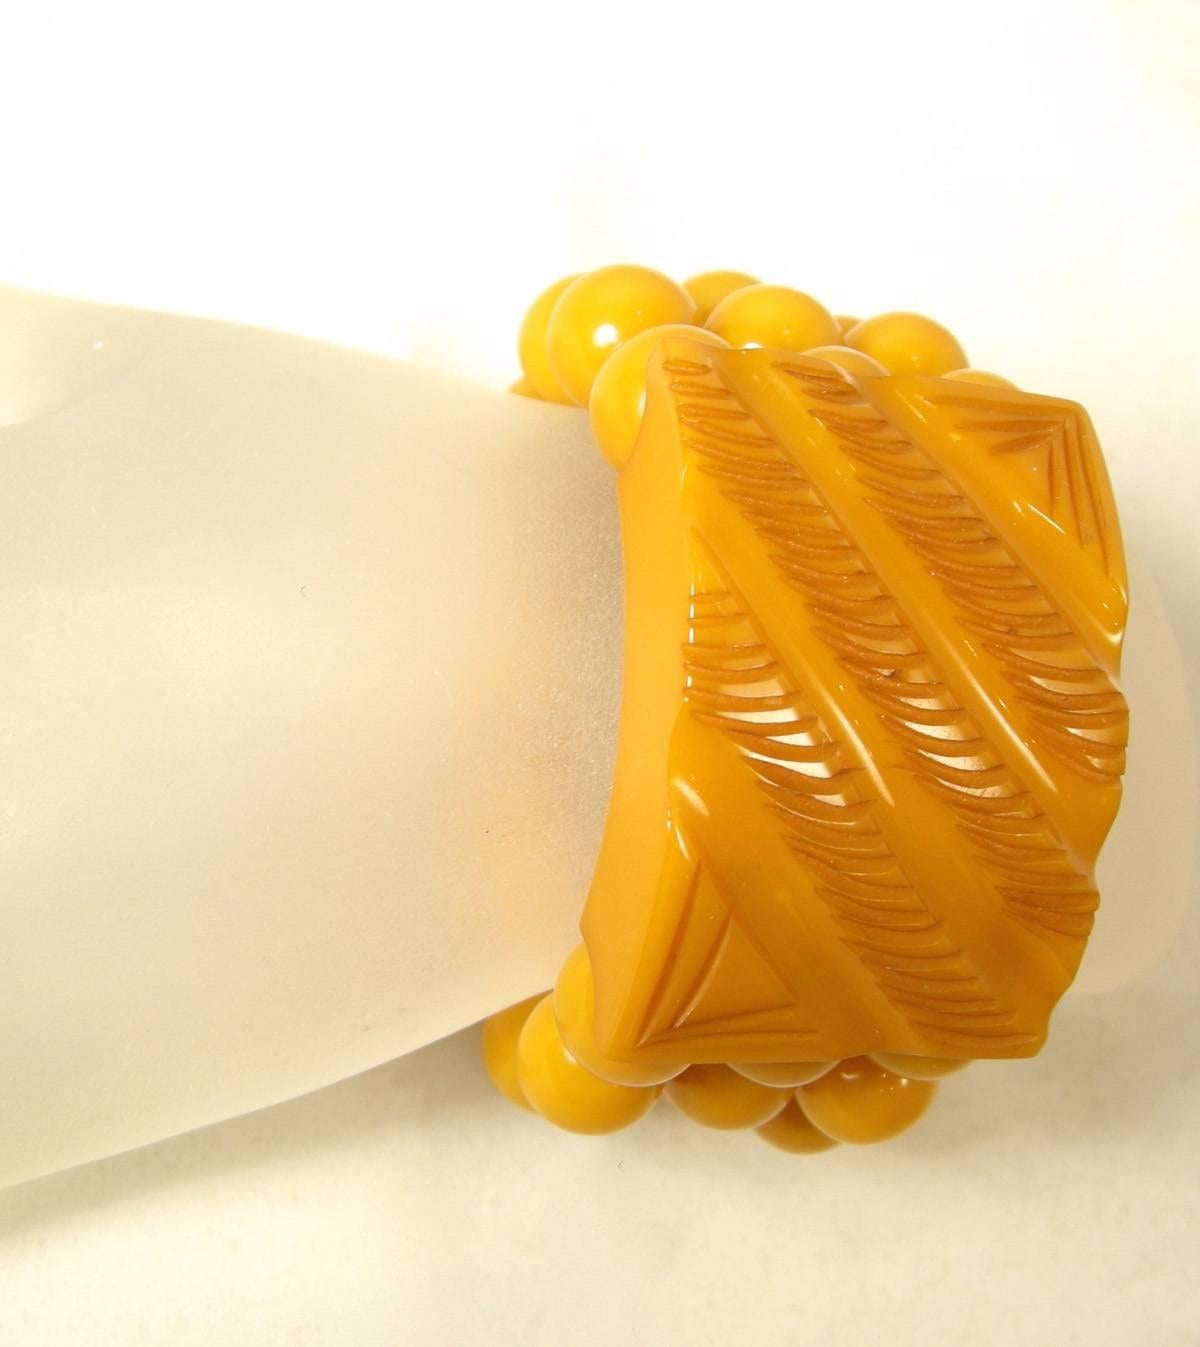 I love butterscotch Bakelite and this is no exception.  It has 3 rows of Bakelite beads leading to the carved rectangular center.  The center is 1-1/2” x 2”.   The Bakelite beads are connected to stretch.  It will fit a size 5-6 size wrist